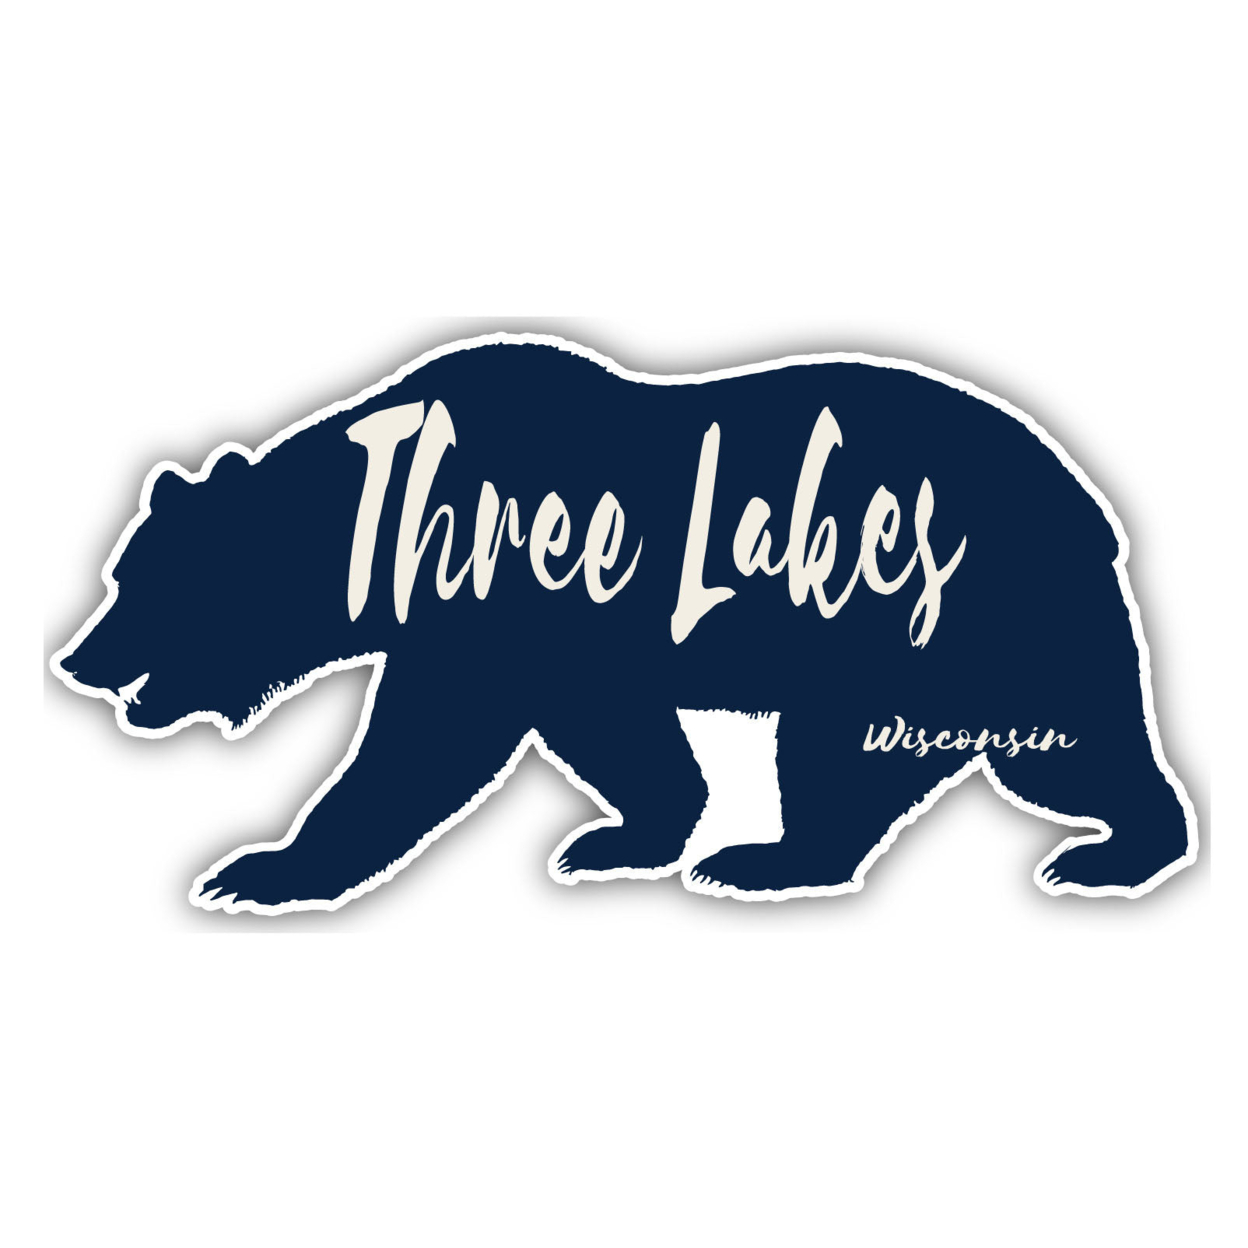 Three Lakes Wisconsin Souvenir Decorative Stickers (Choose Theme And Size) - Single Unit, 4-Inch, Great Outdoors